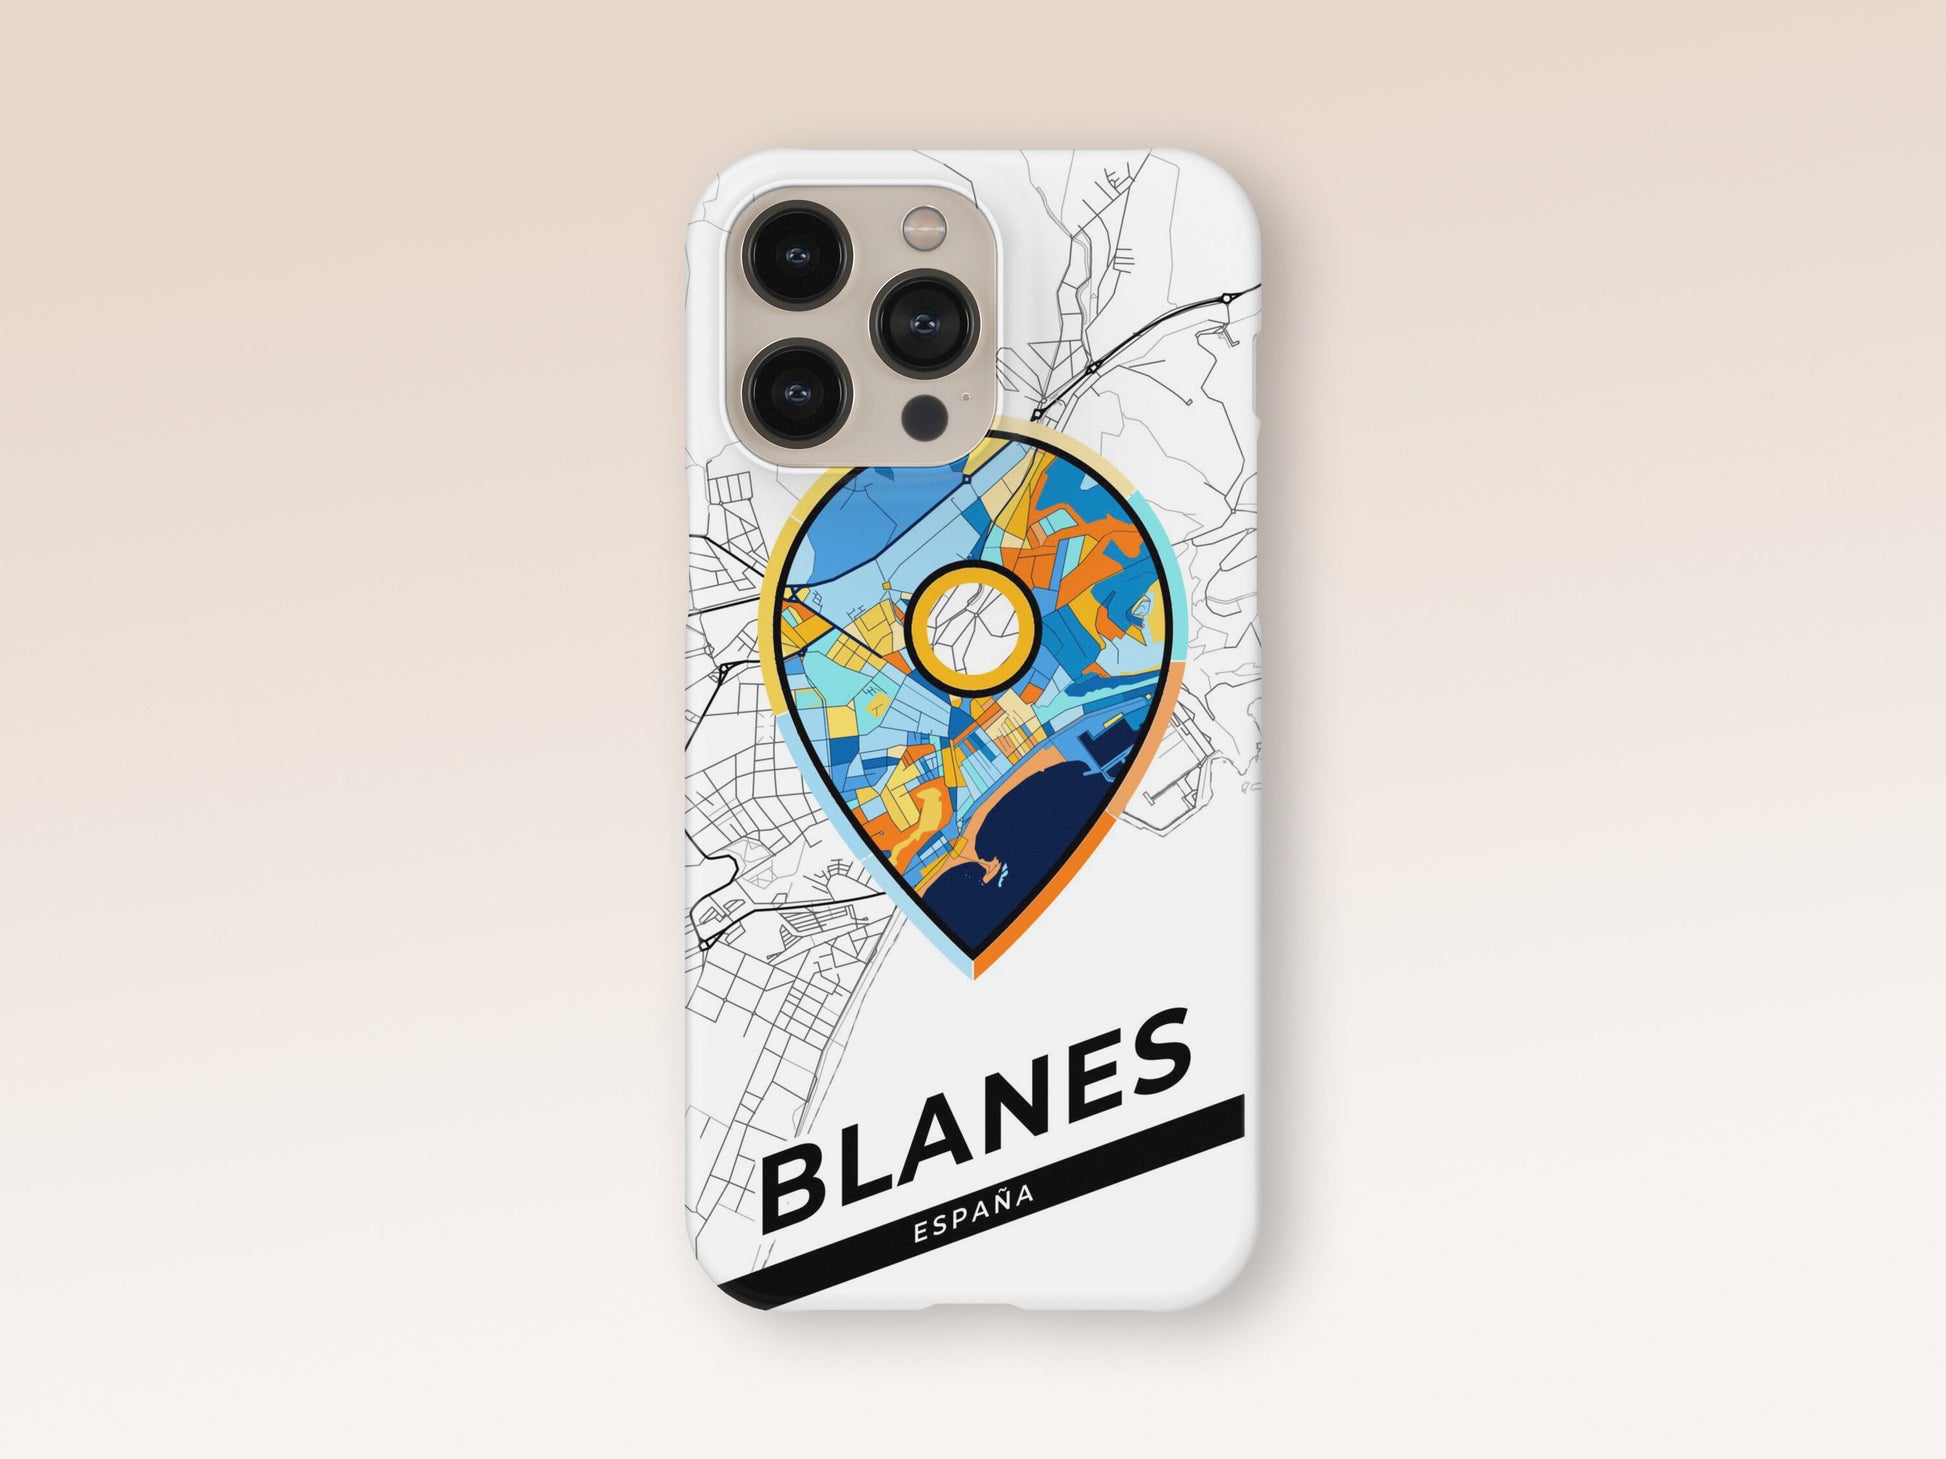 Blanes Spain slim phone case with colorful icon. Birthday, wedding or housewarming gift. Couple match cases. 1